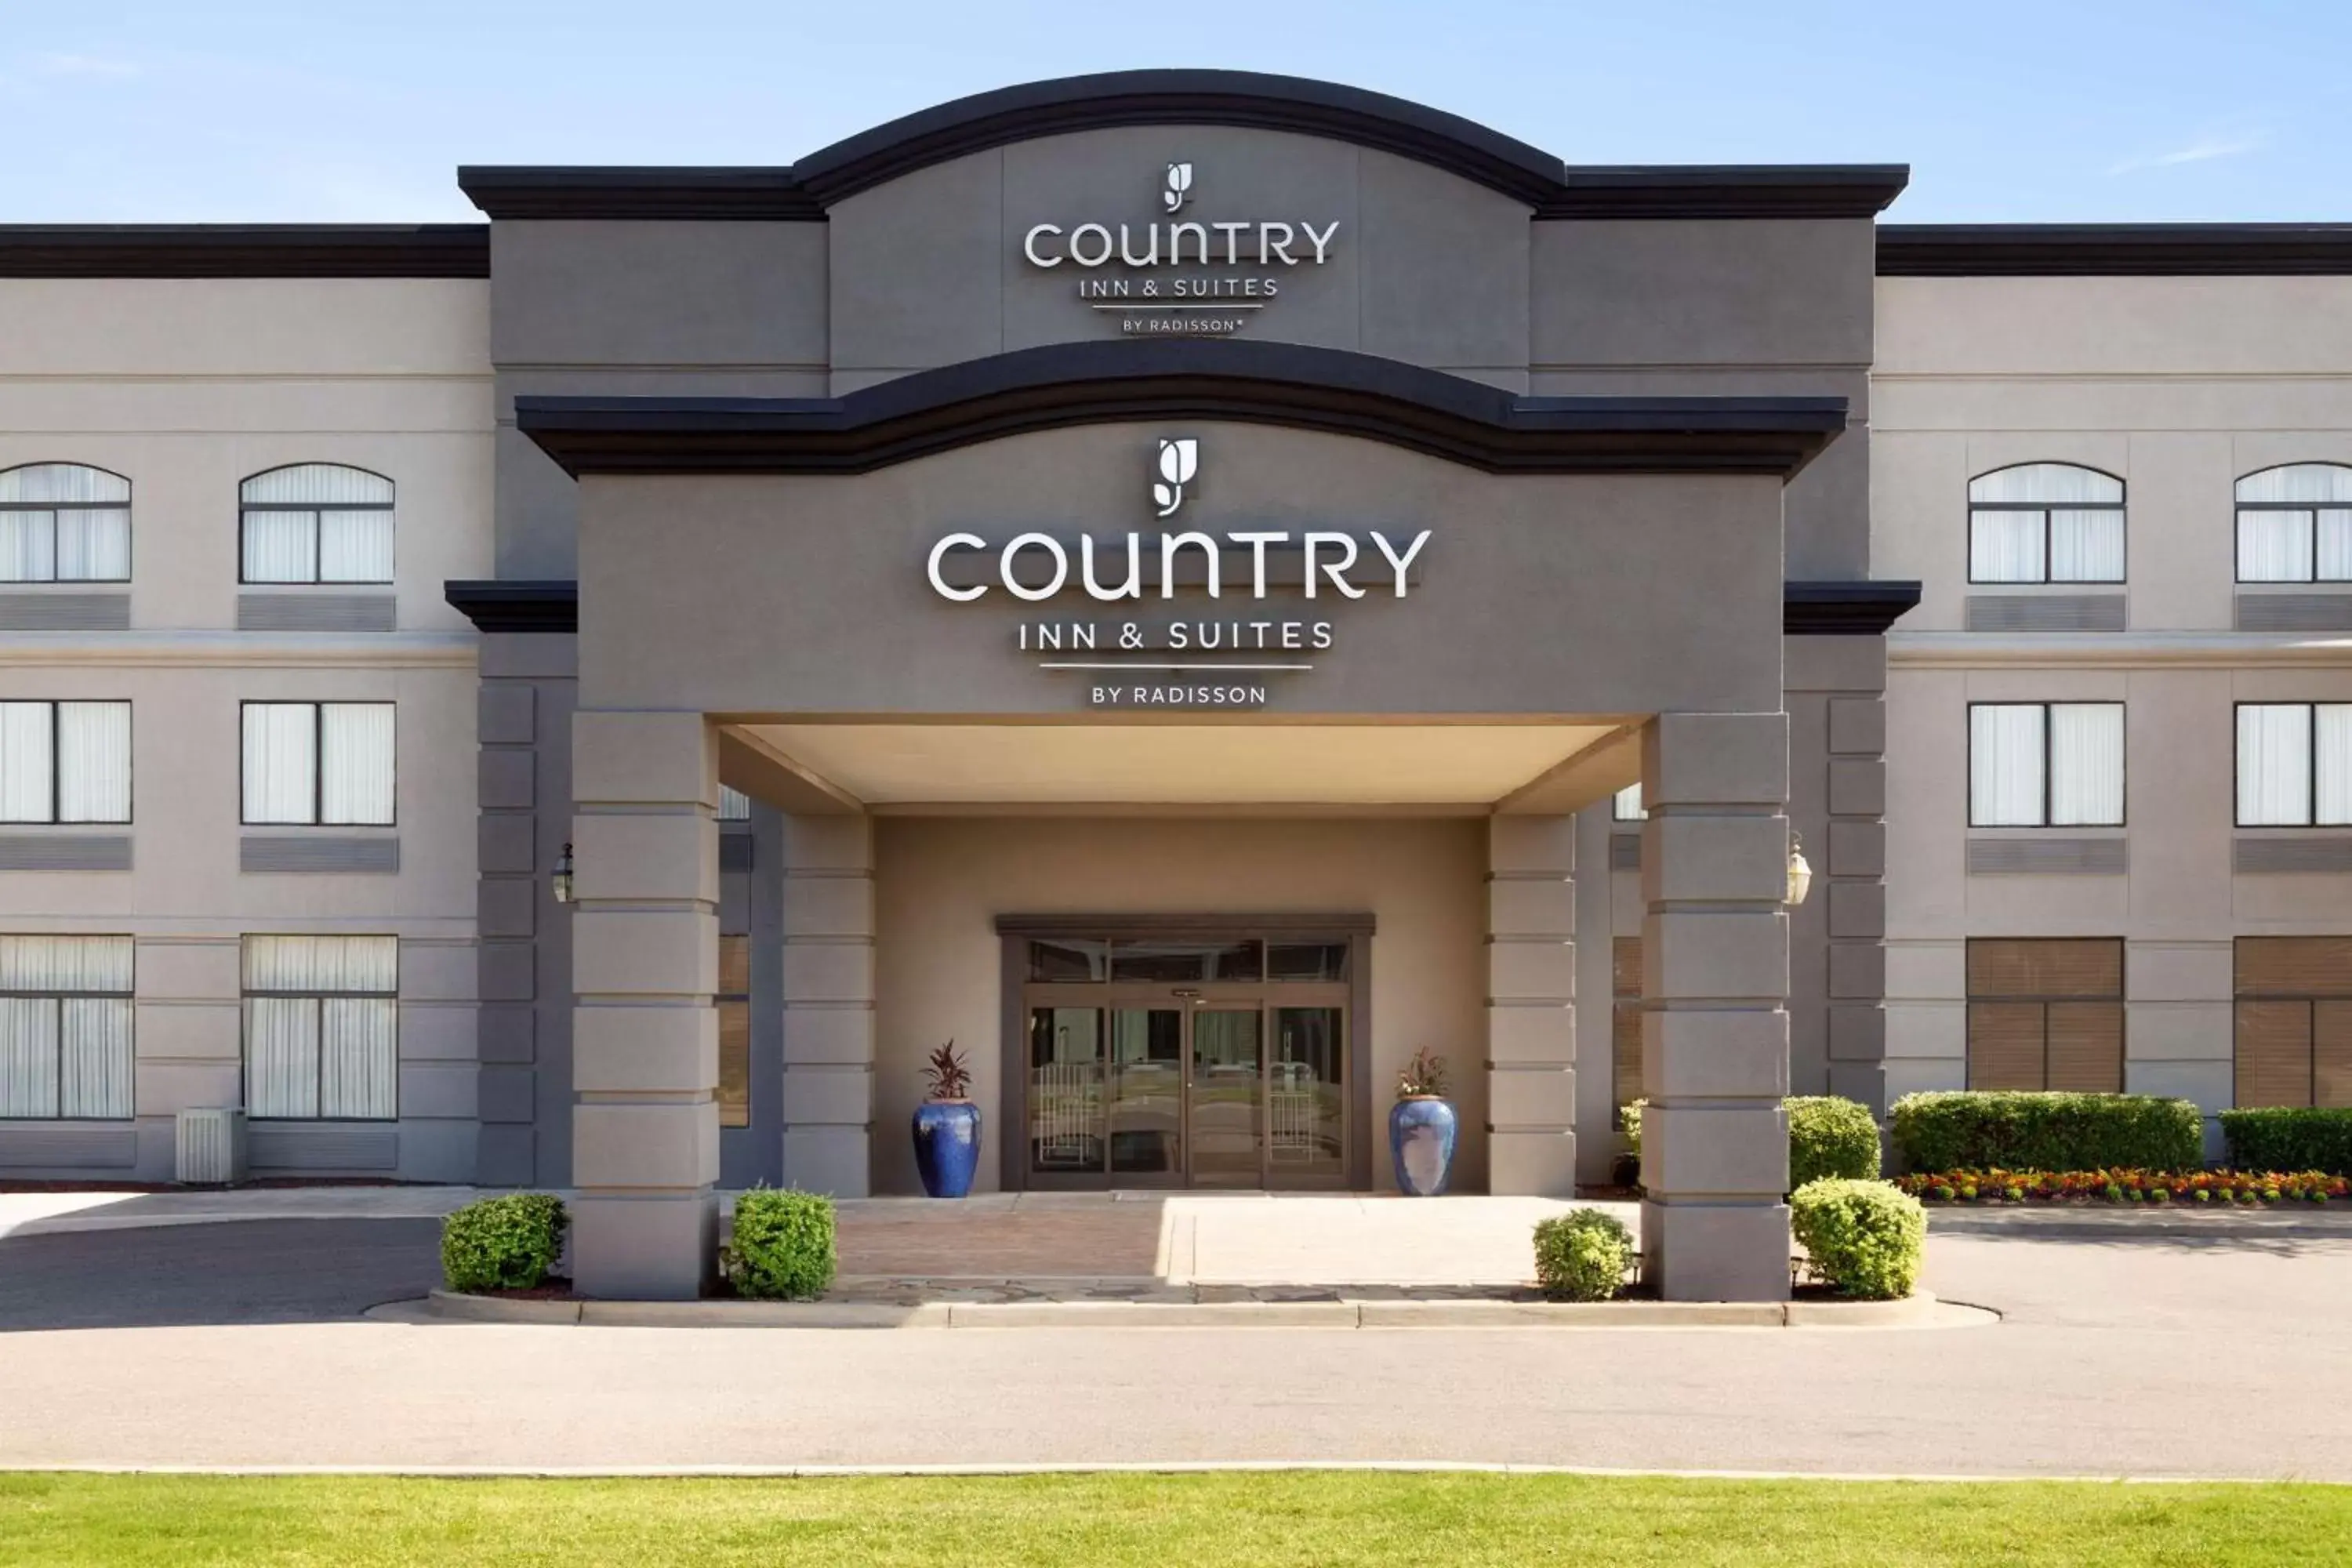 Property building in Country Inn & Suites by Radisson, Wolfchase-Memphis, TN